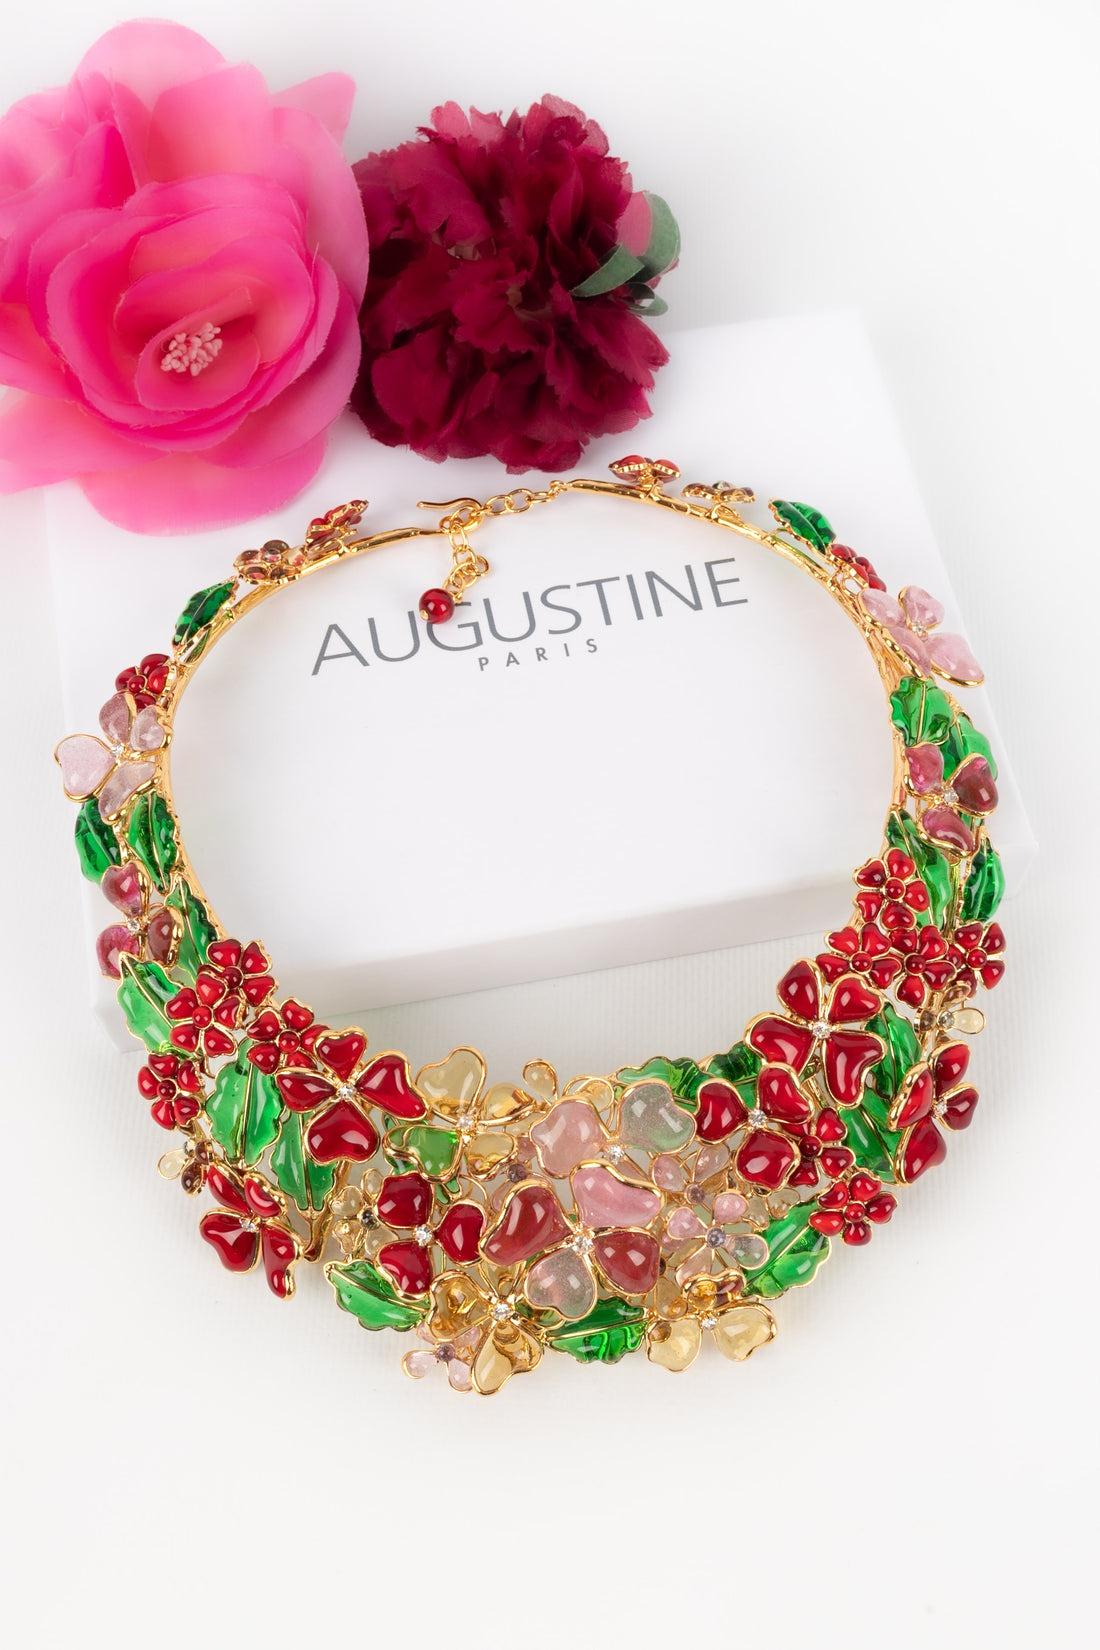 Augustine - (Made in France) Unbending golden metal necklace with glass paste flowers.

Additional information:
Condition: Very good condition
Dimensions: Length: from 41 cm to 46 cm

Seller Reference: BC202